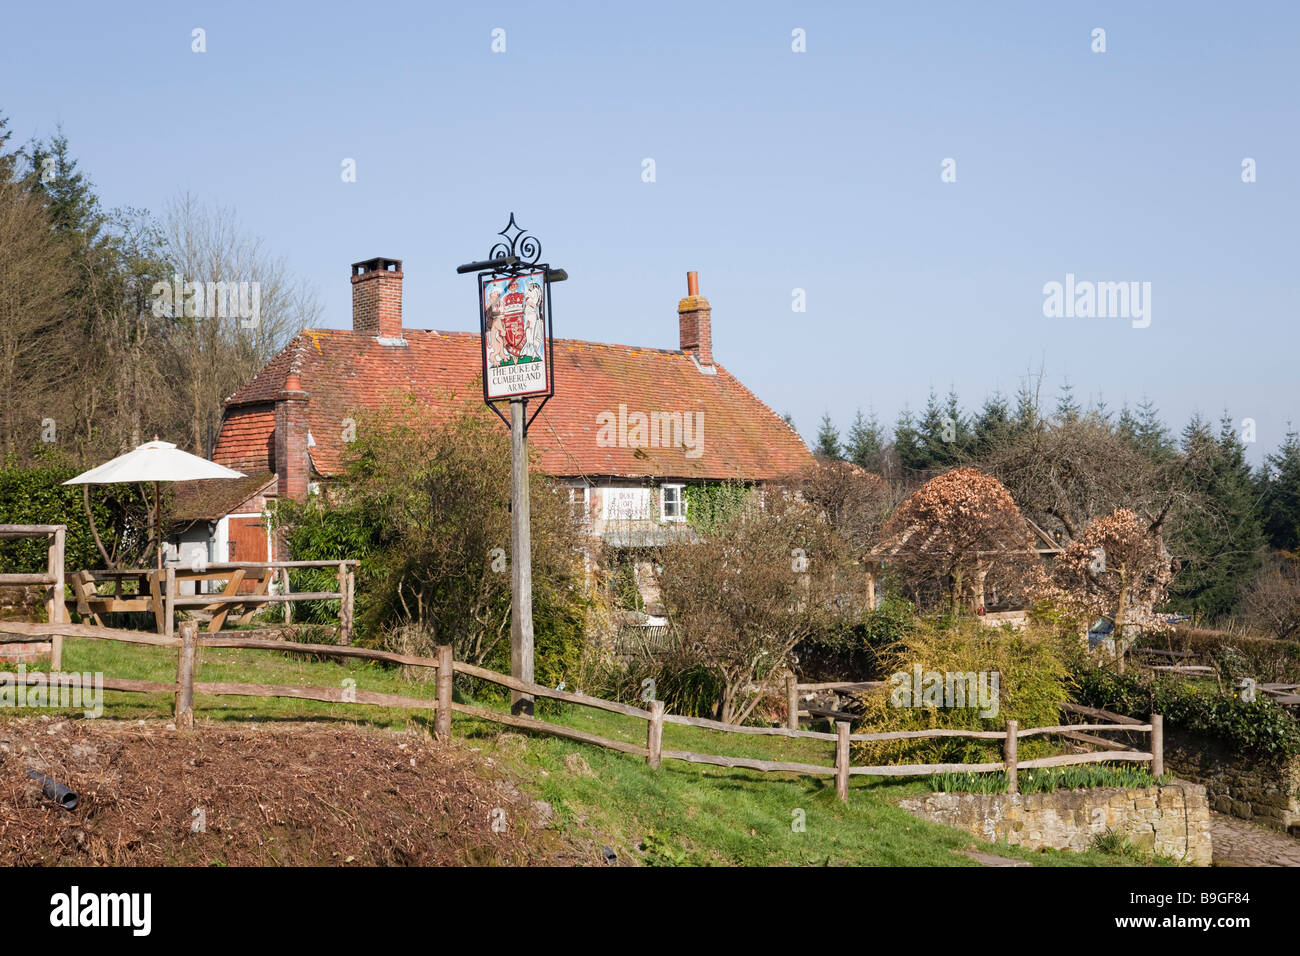 The Duke of Cumberland quintessential English country pub in hamlet near Midhurst in South Downs National Park. Henley West Sussex England UK Stock Photo